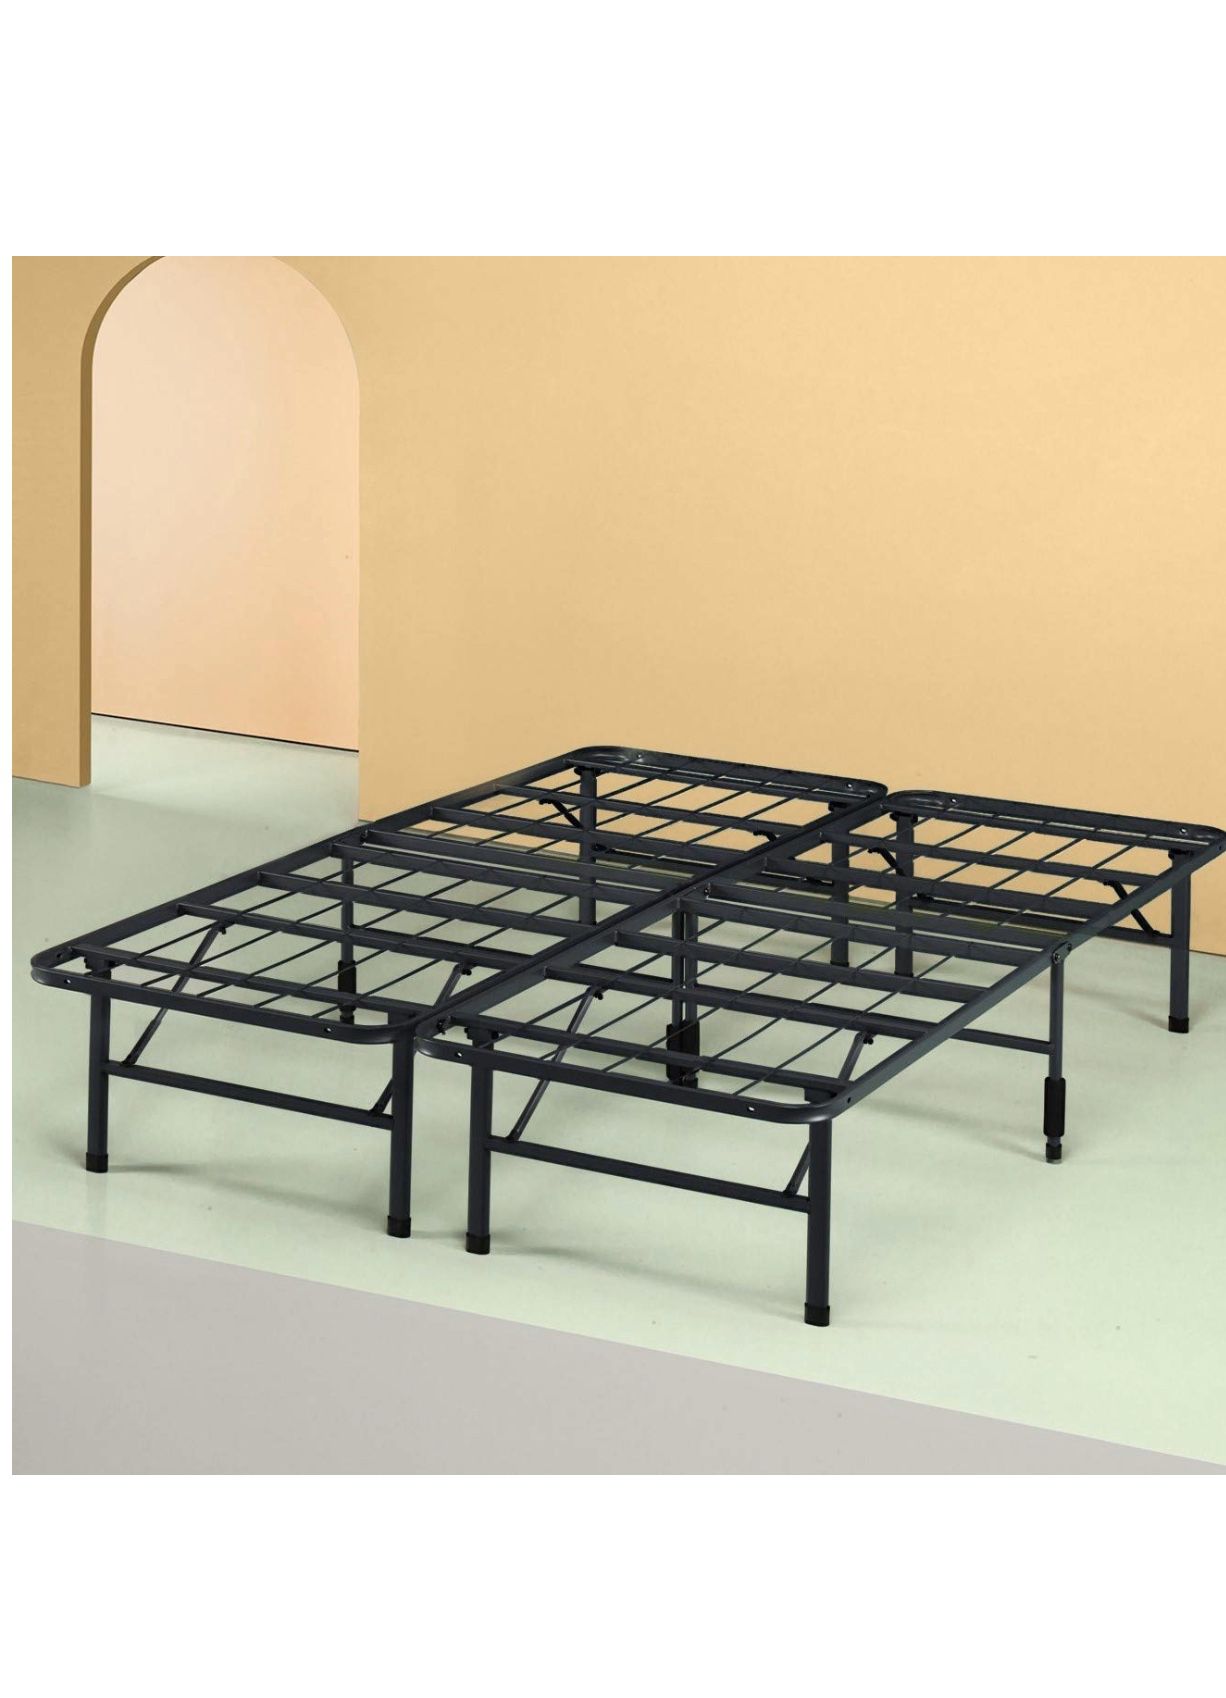 King Size Collapsible Foldable Metal Bed Frame / Box Spring